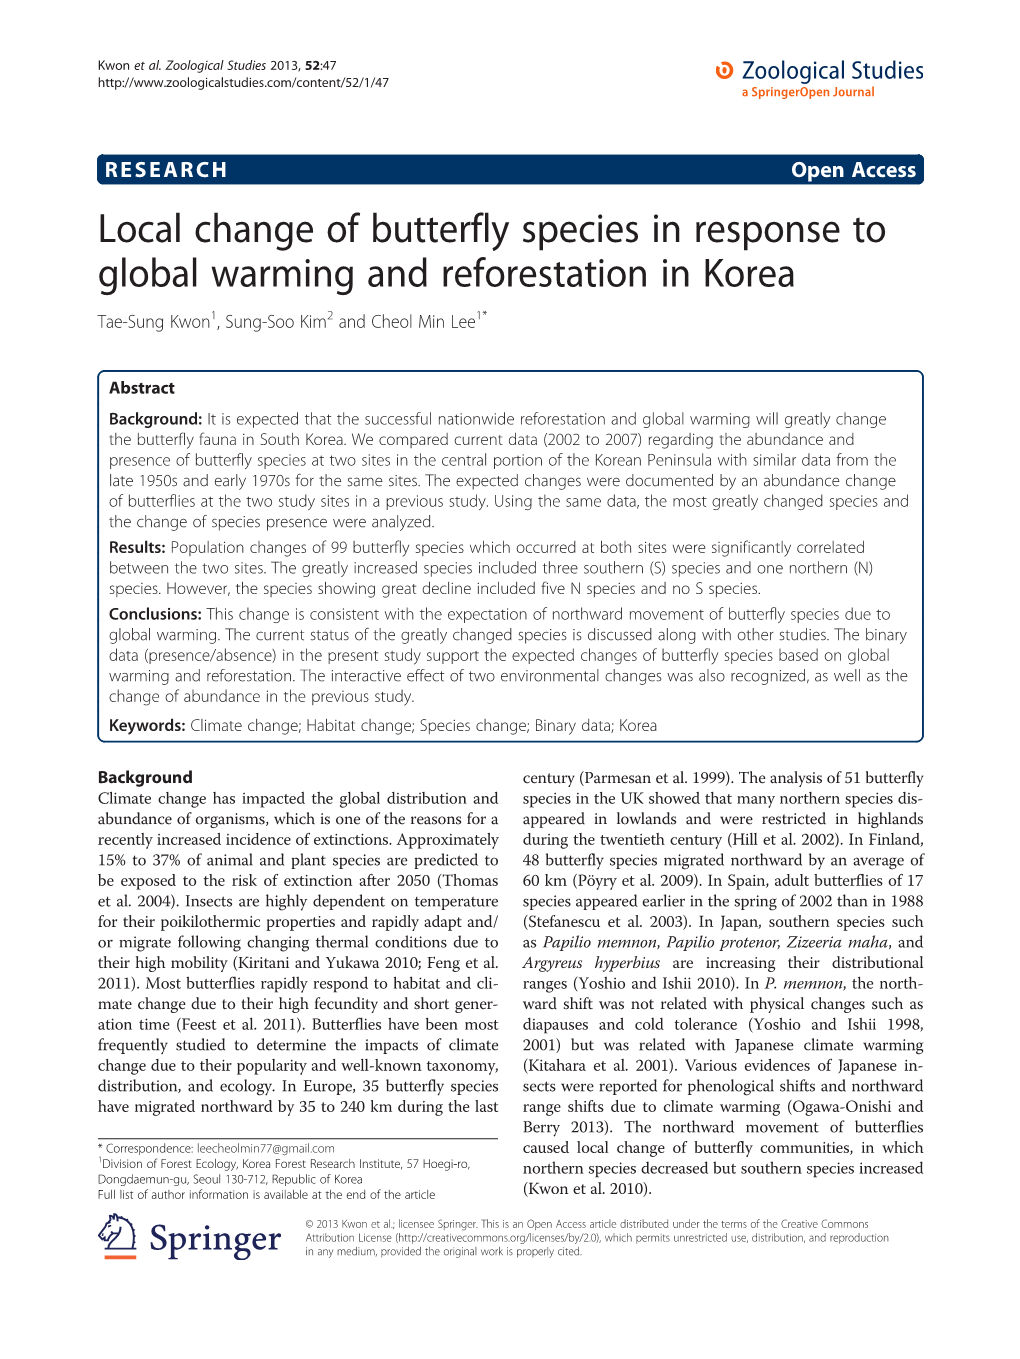 Local Change of Butterfly Species in Response to Global Warming and Reforestation in Korea Tae-Sung Kwon1, Sung-Soo Kim2 and Cheol Min Lee1*